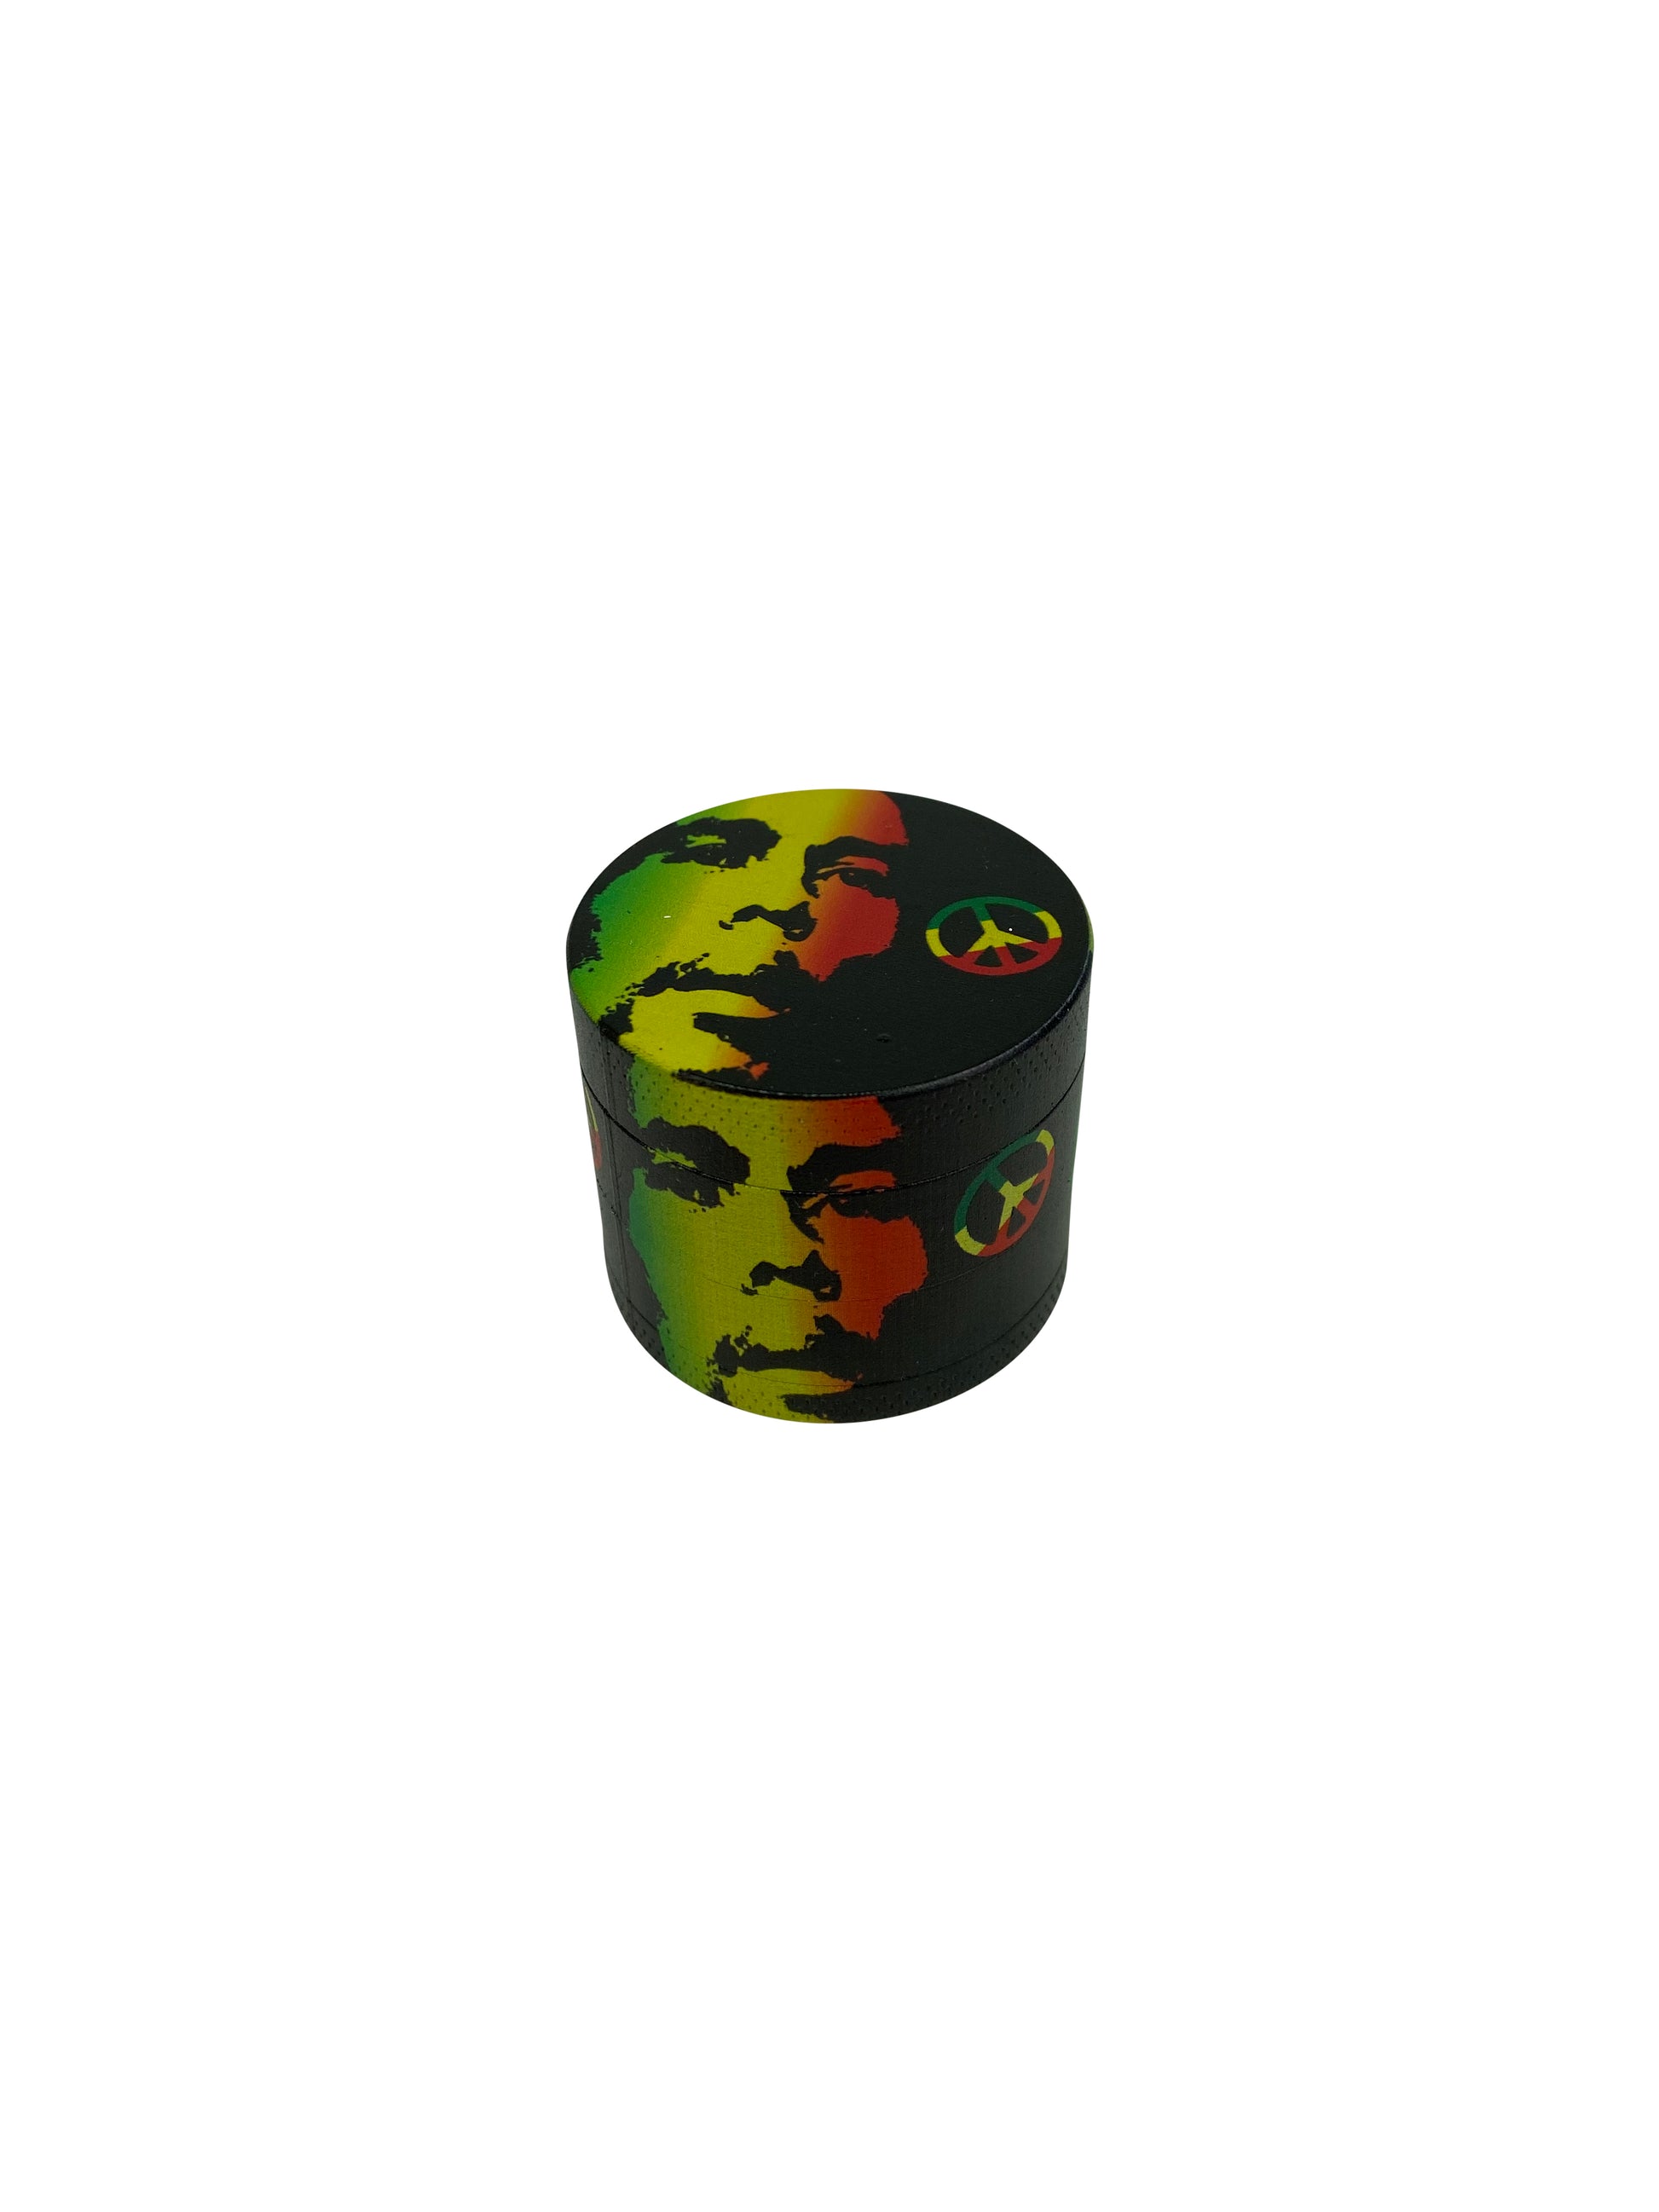 Small Herb Grinder With Bob Marley Design